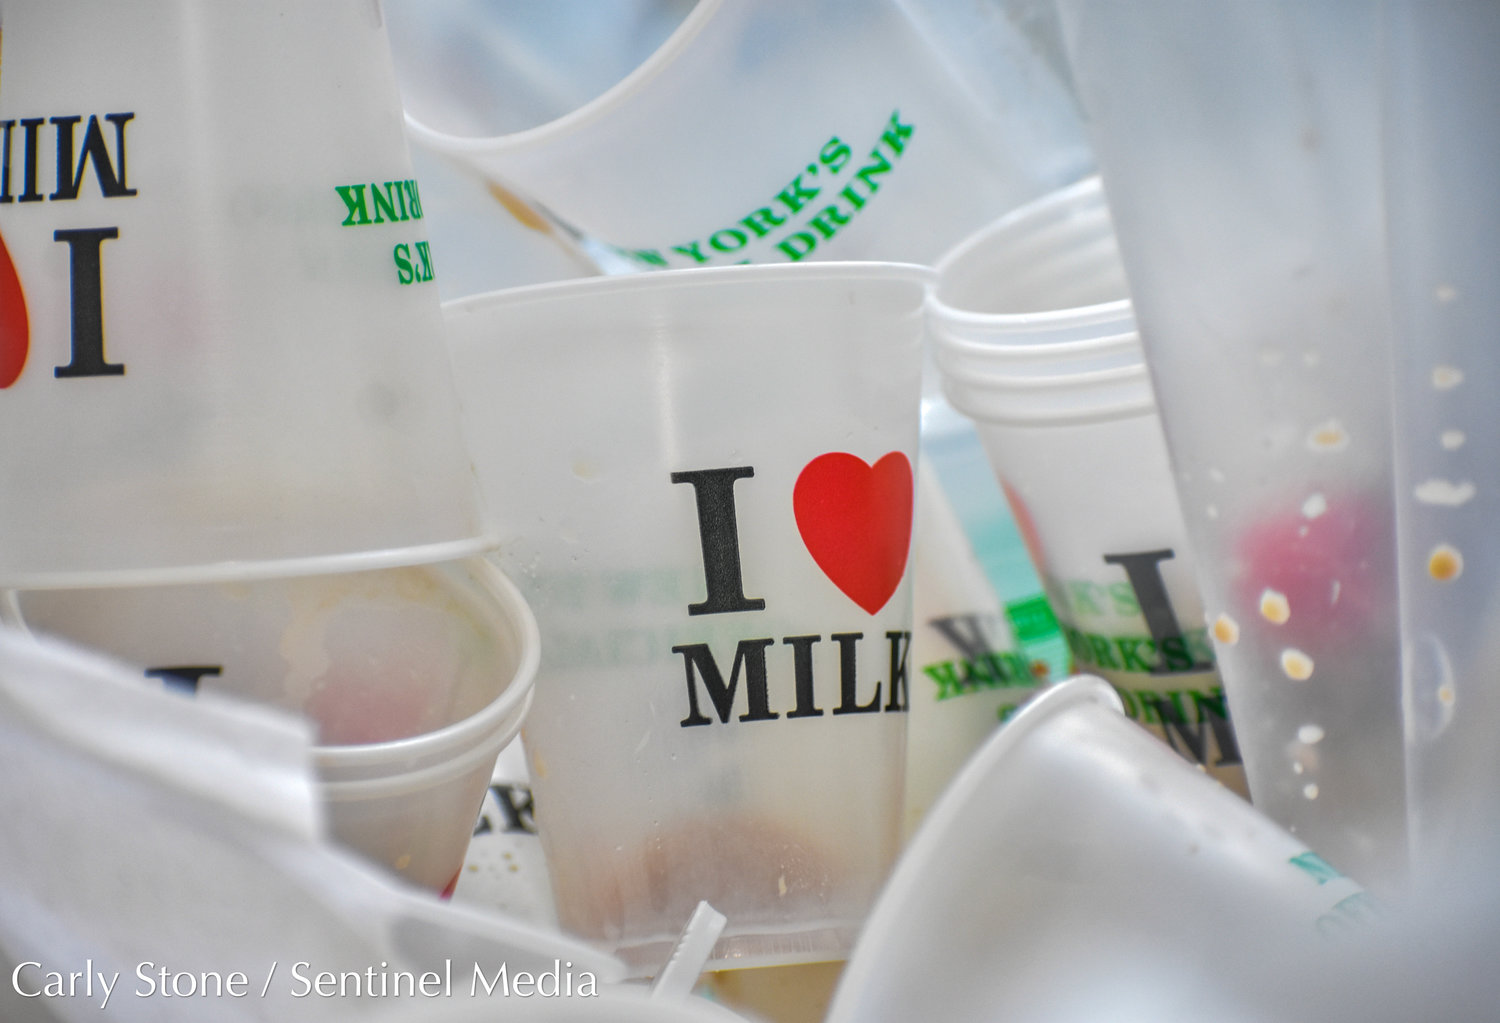 The NYS Fair's famous 25-cent milk is back again for 2022.